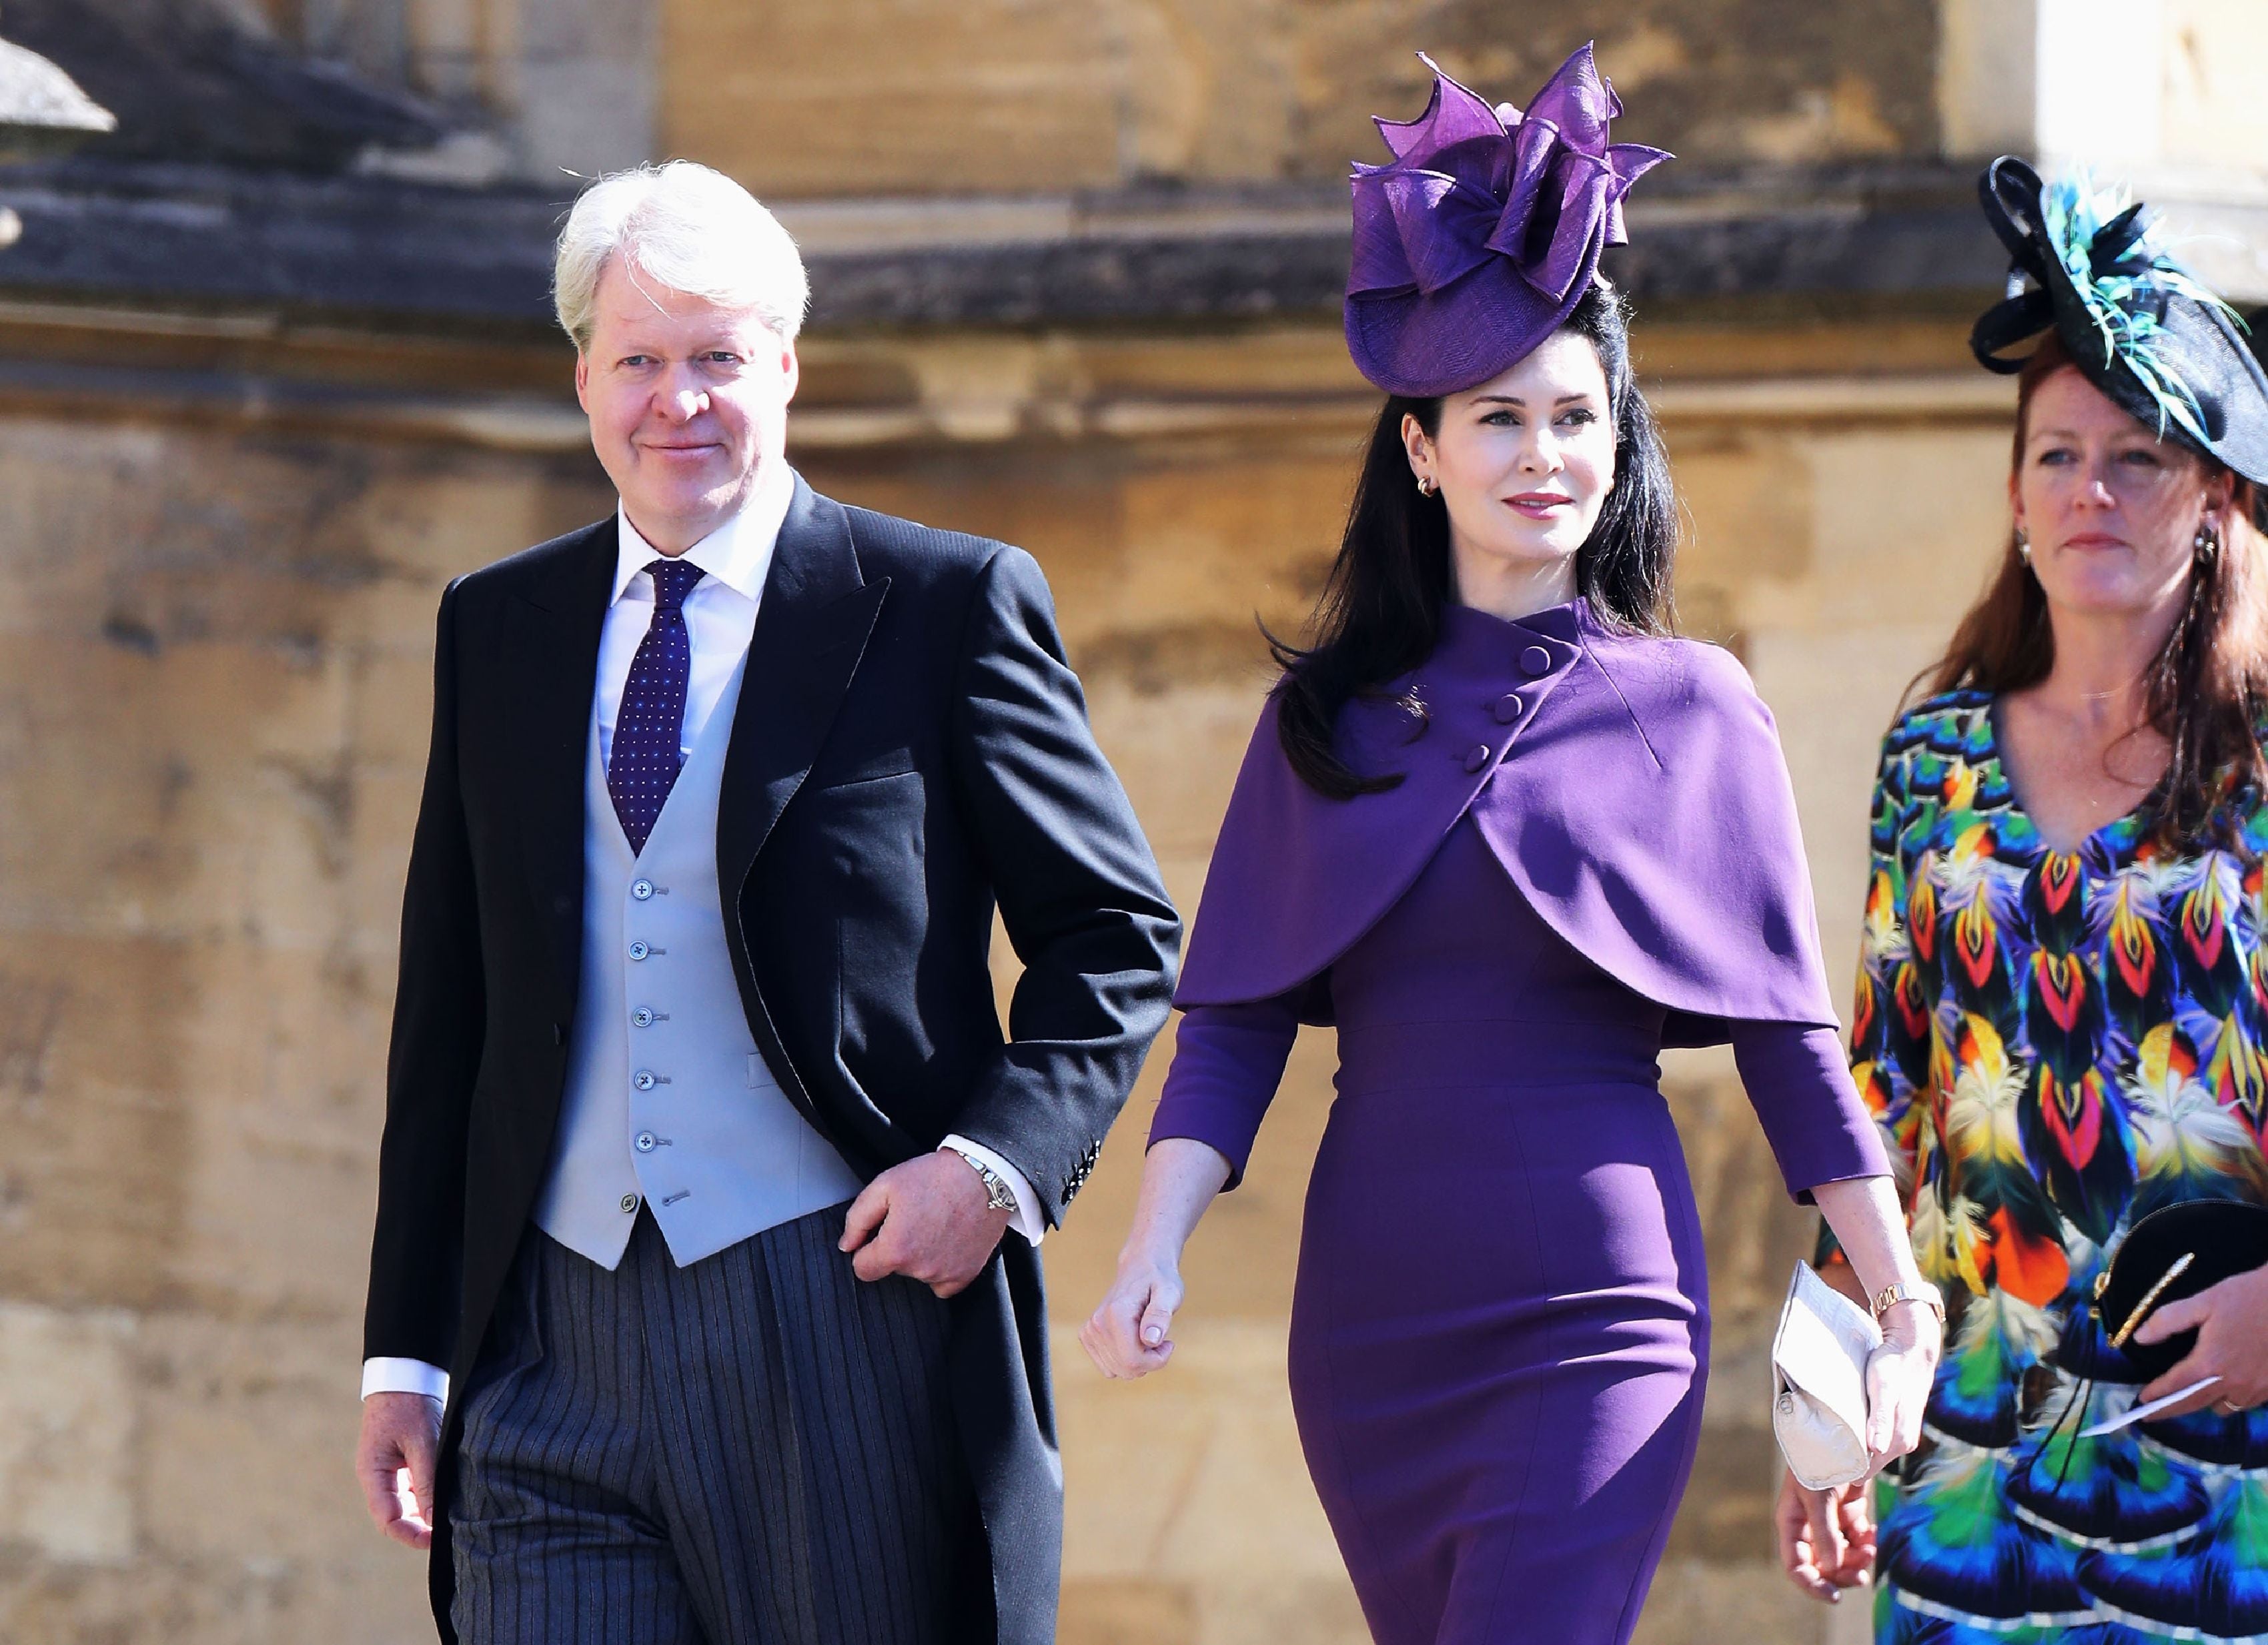 Earl Charles Spencer and wife Karen Spencer attend royal wedding of Prince Harry and Meghan Markle at St George's Chapel in Windsor, UK, on May 19, 2018